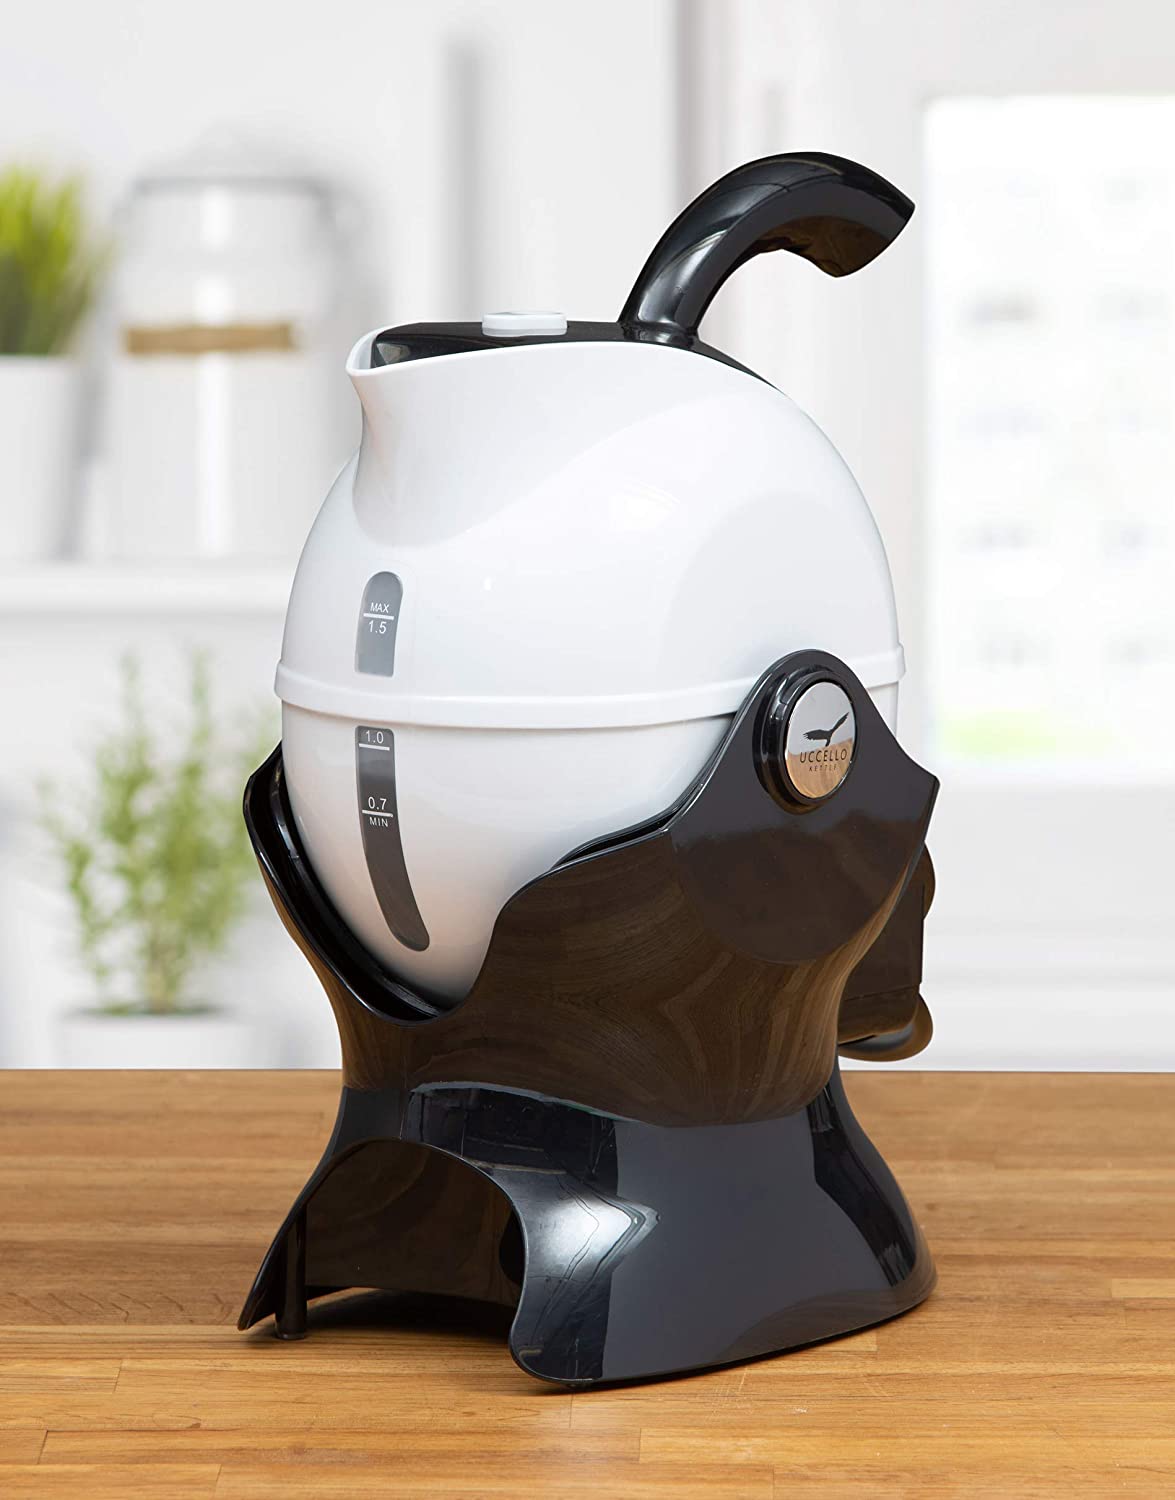 The Uccello Safety Kettle with Effortless Pour